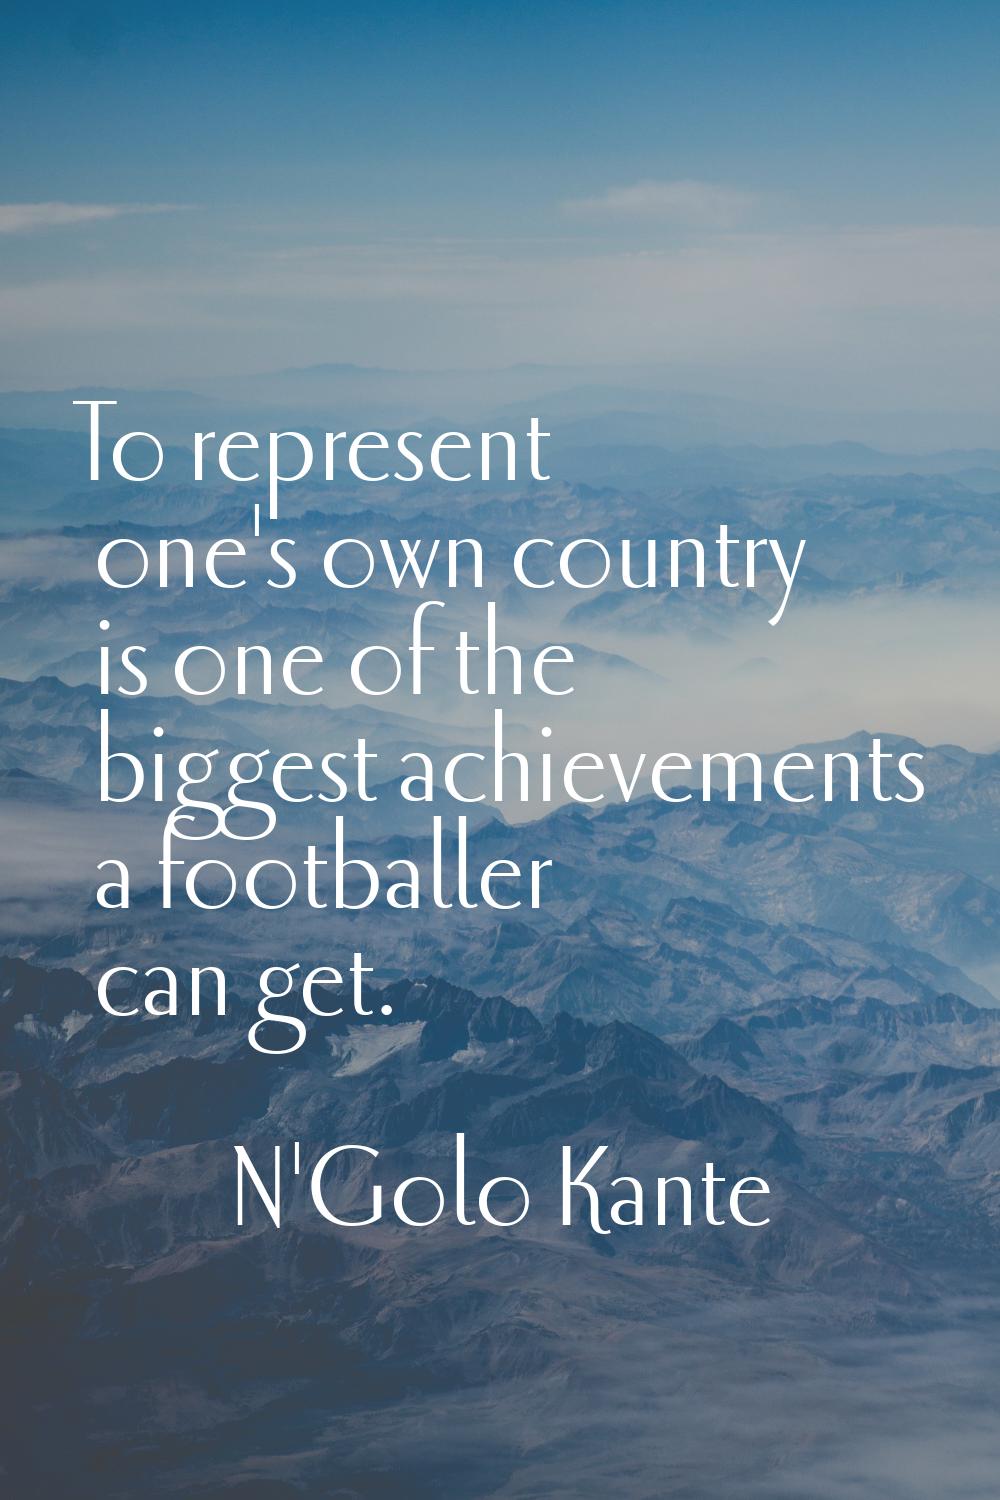 To represent one's own country is one of the biggest achievements a footballer can get.